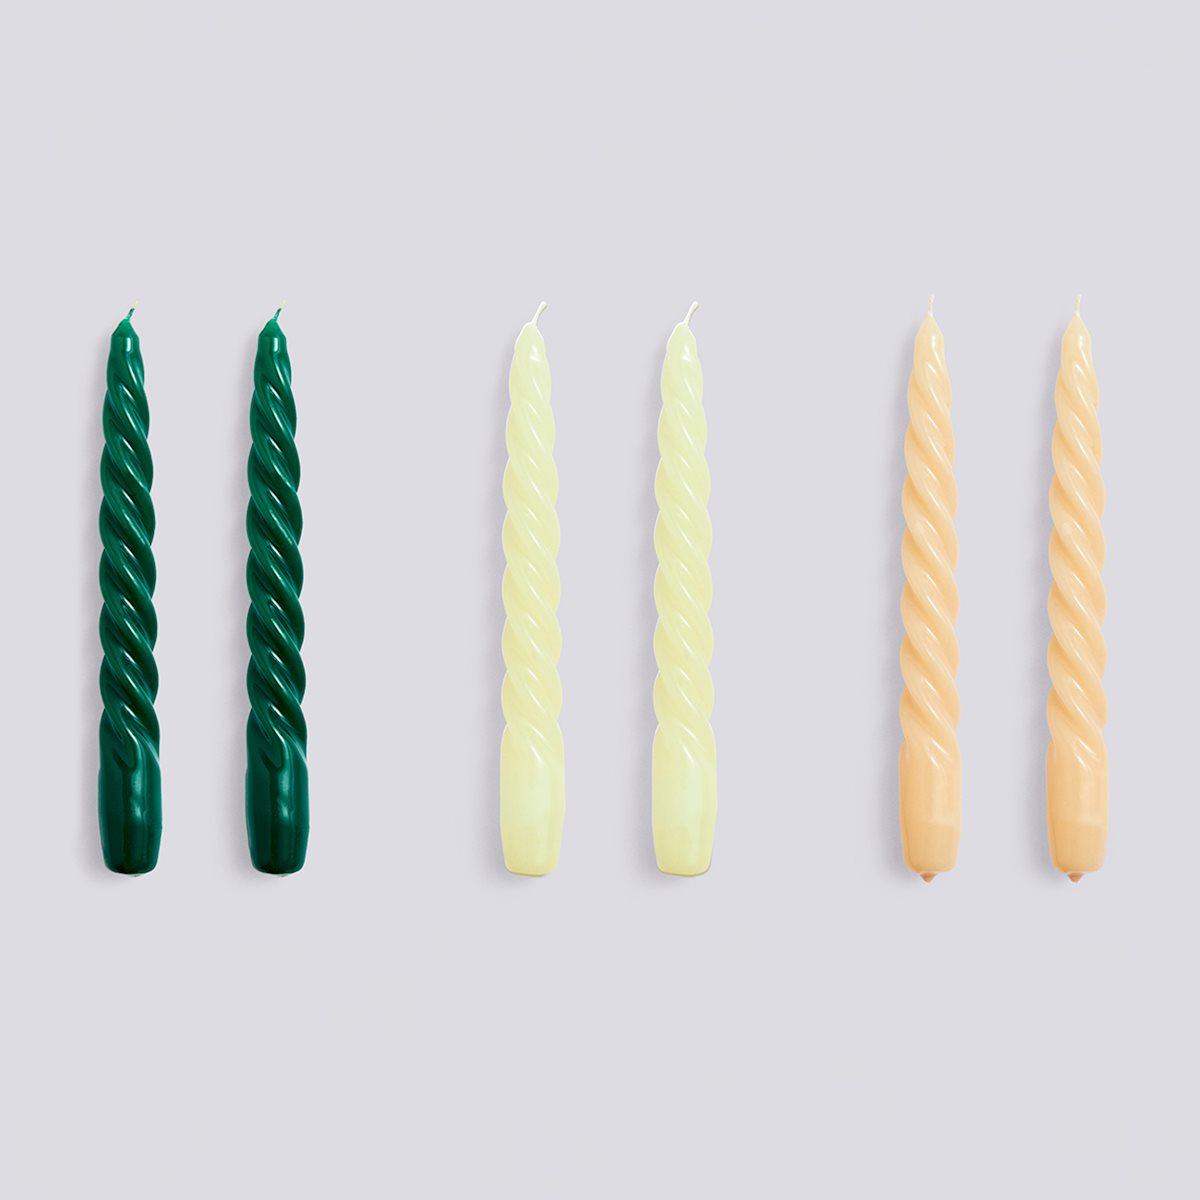 HAY Twisted Candles Set of 6 - Green/Citrus/Beige